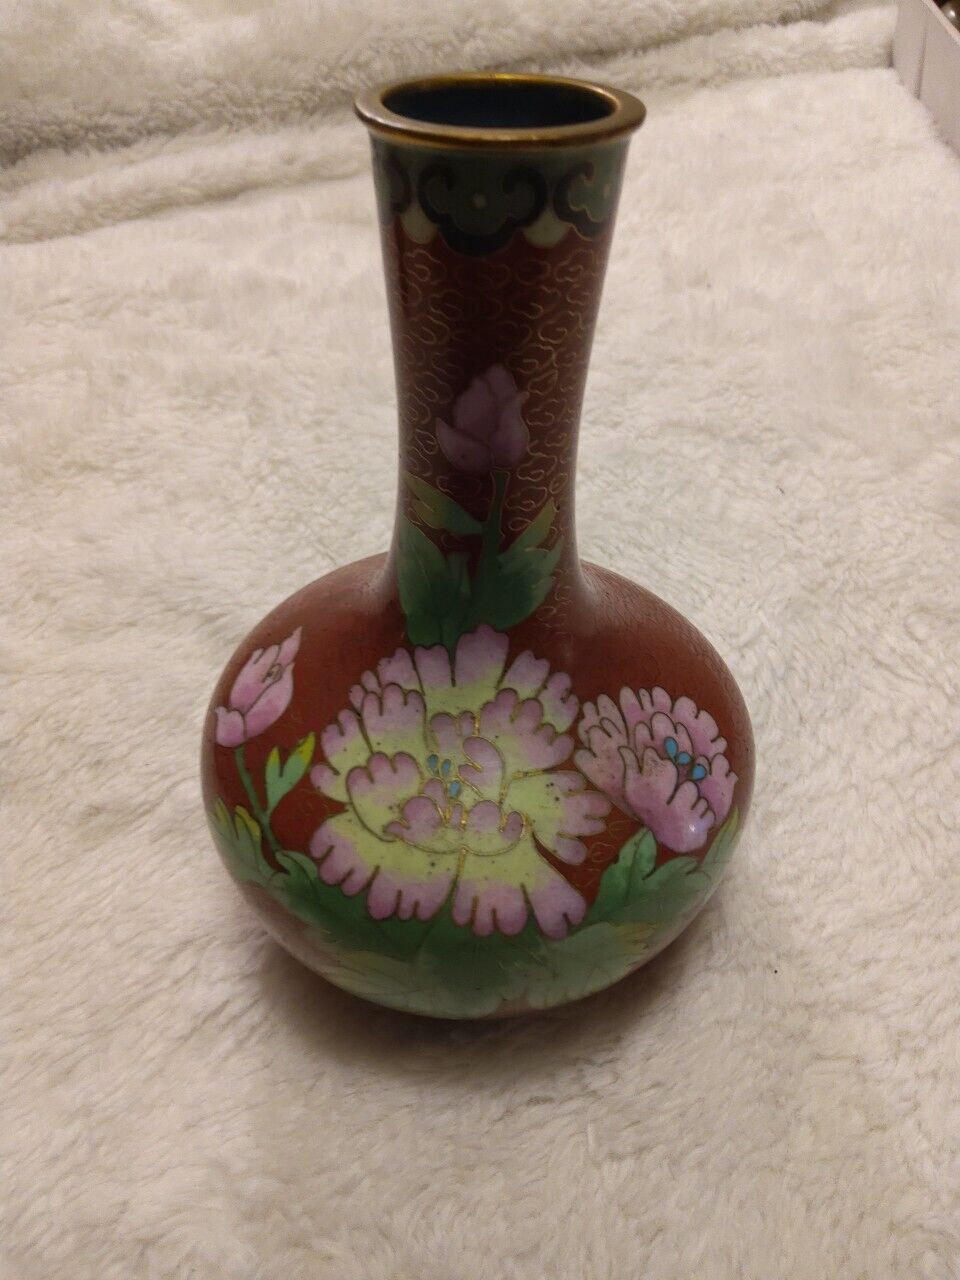 Vintage Small Chinese Brass Enamel Cloisonné Vase With Floral Decoration 6” Tall